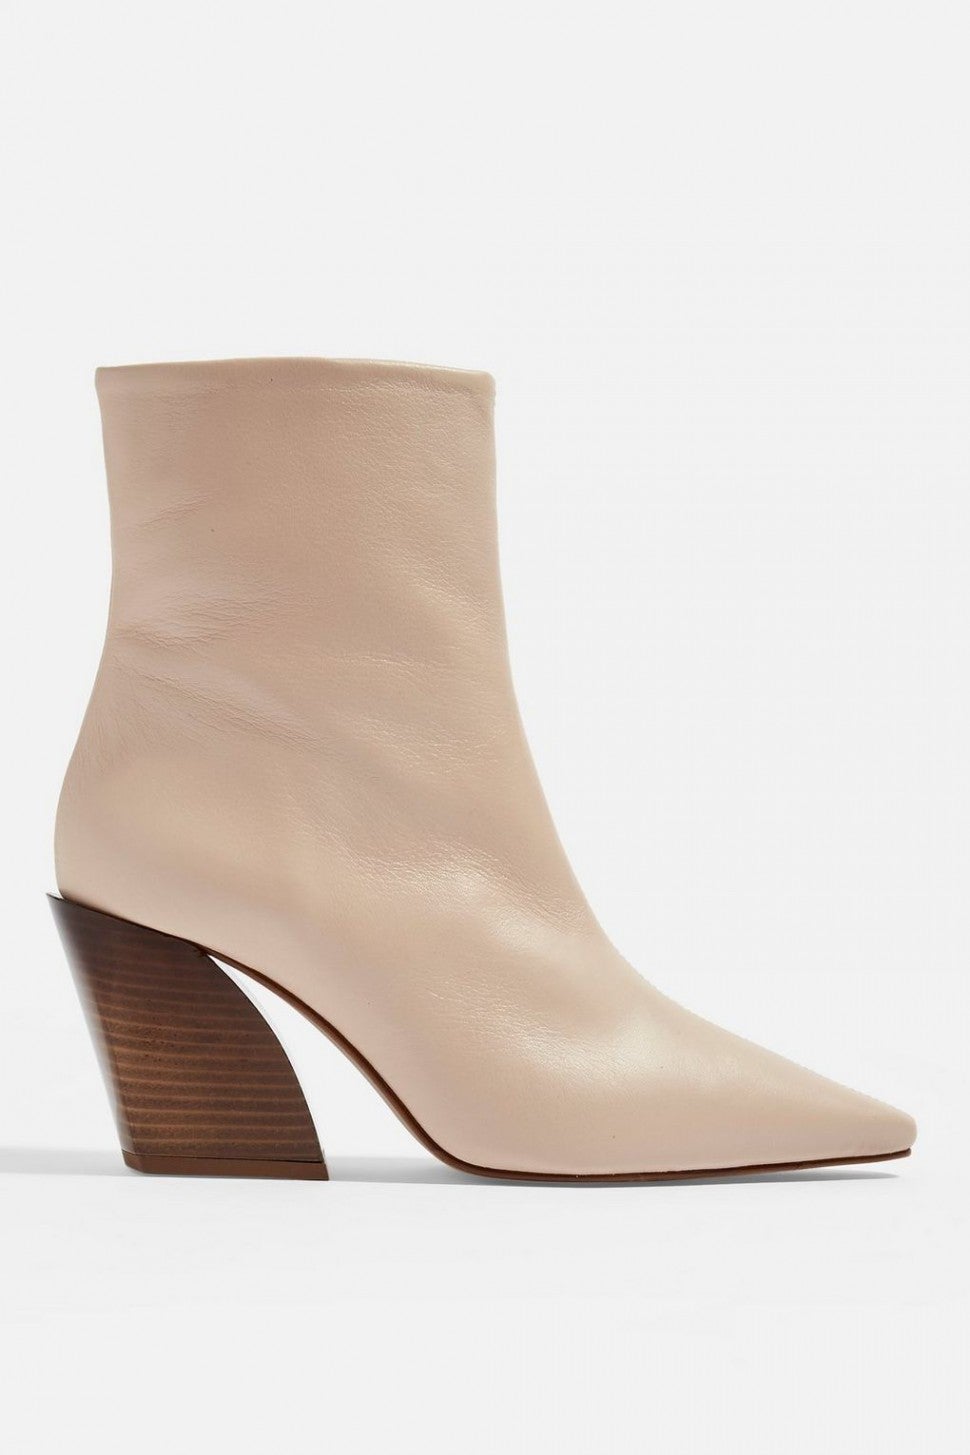 Topshop beige leather boots